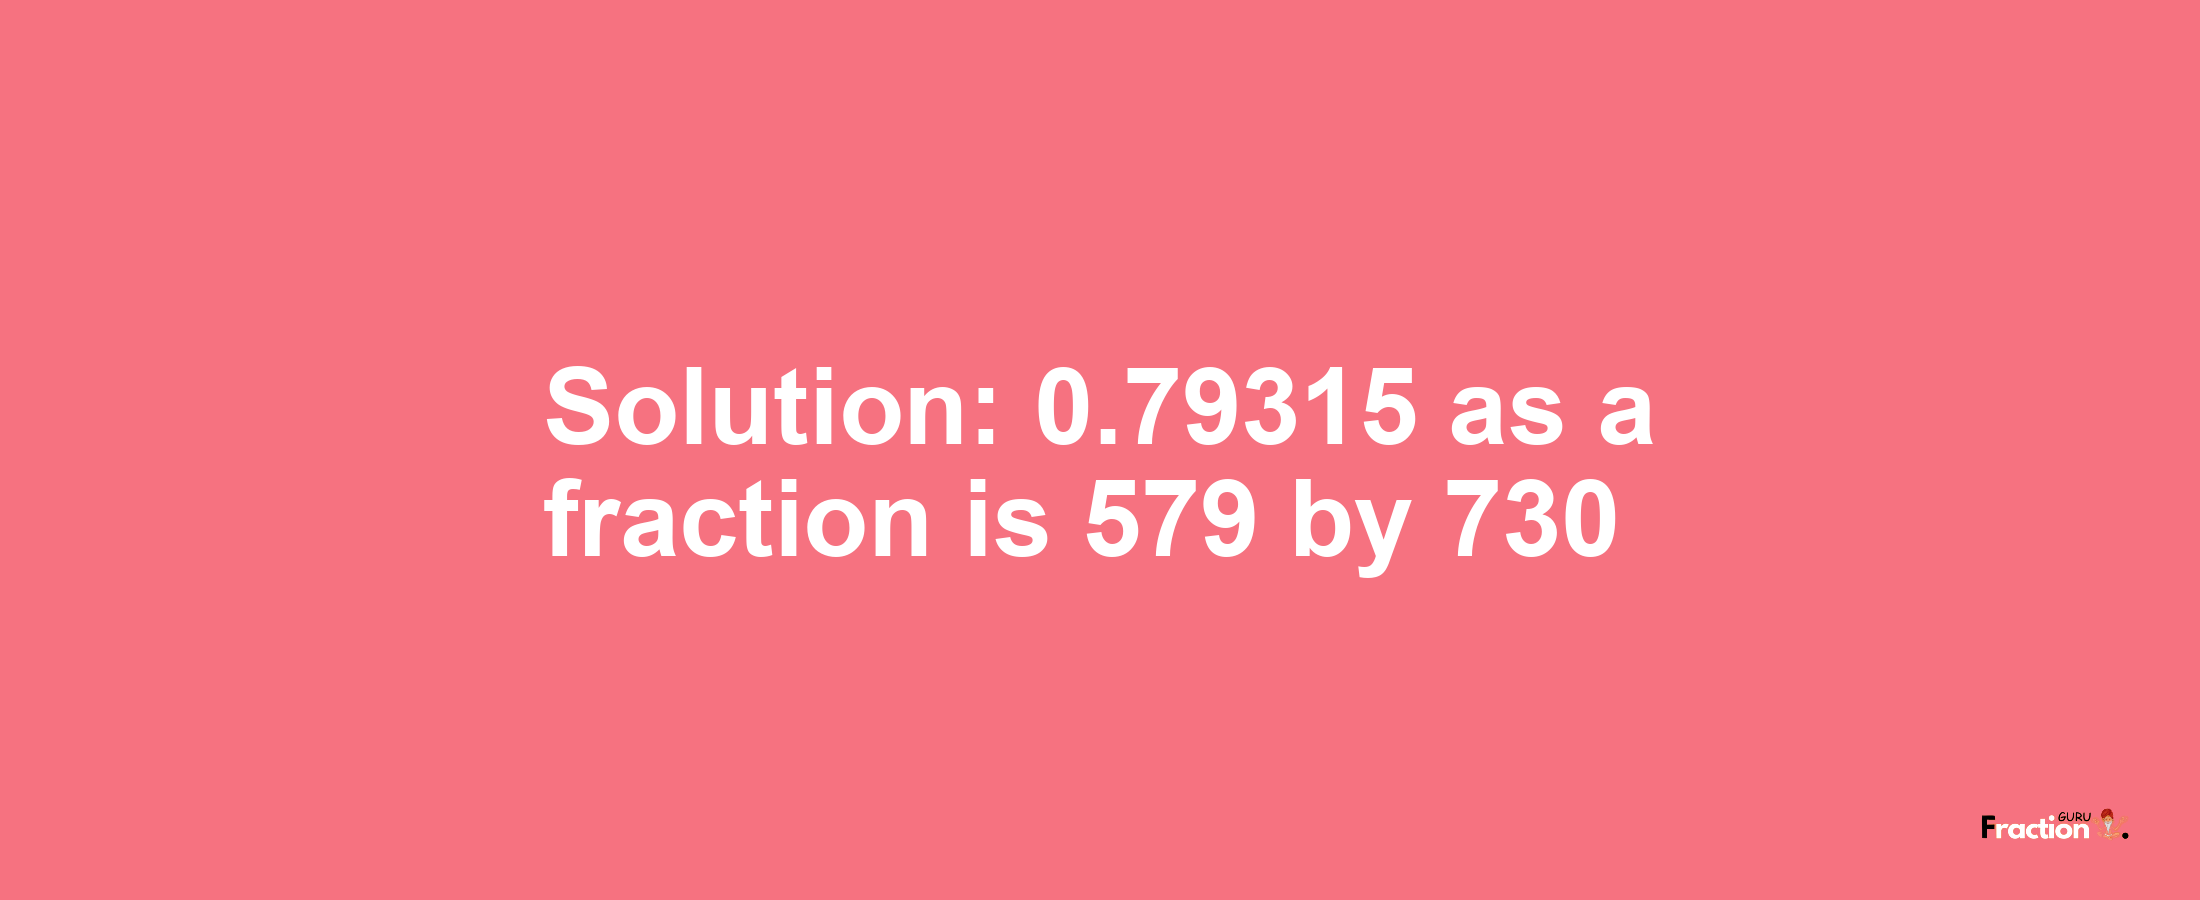 Solution:0.79315 as a fraction is 579/730